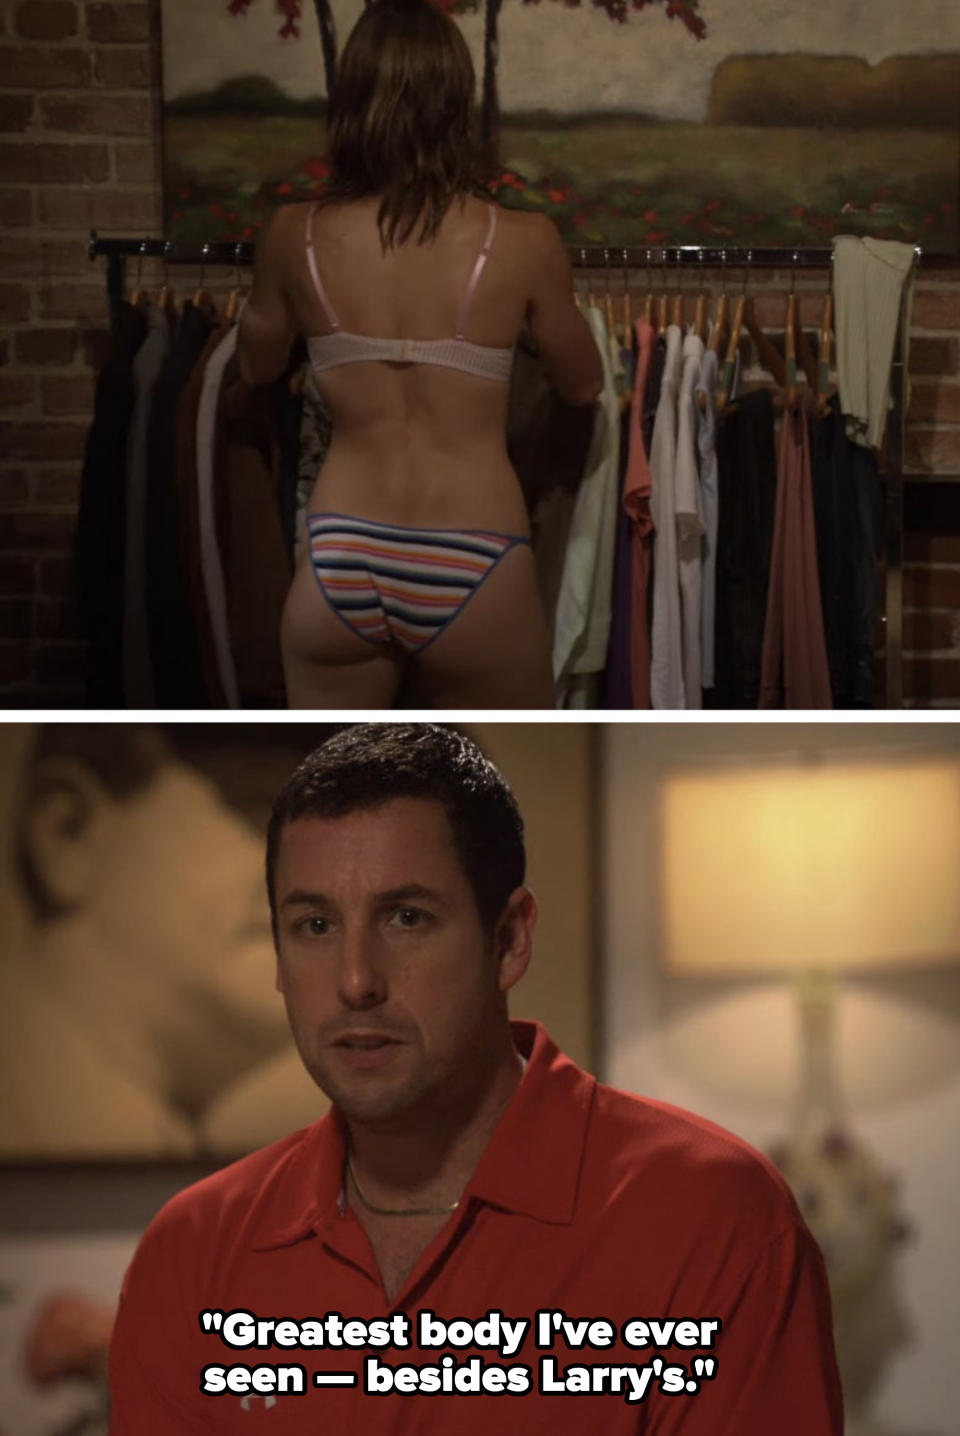 Jessica Biel and Adam Sandler in "I Now Pronounce You Chuck & Larry"